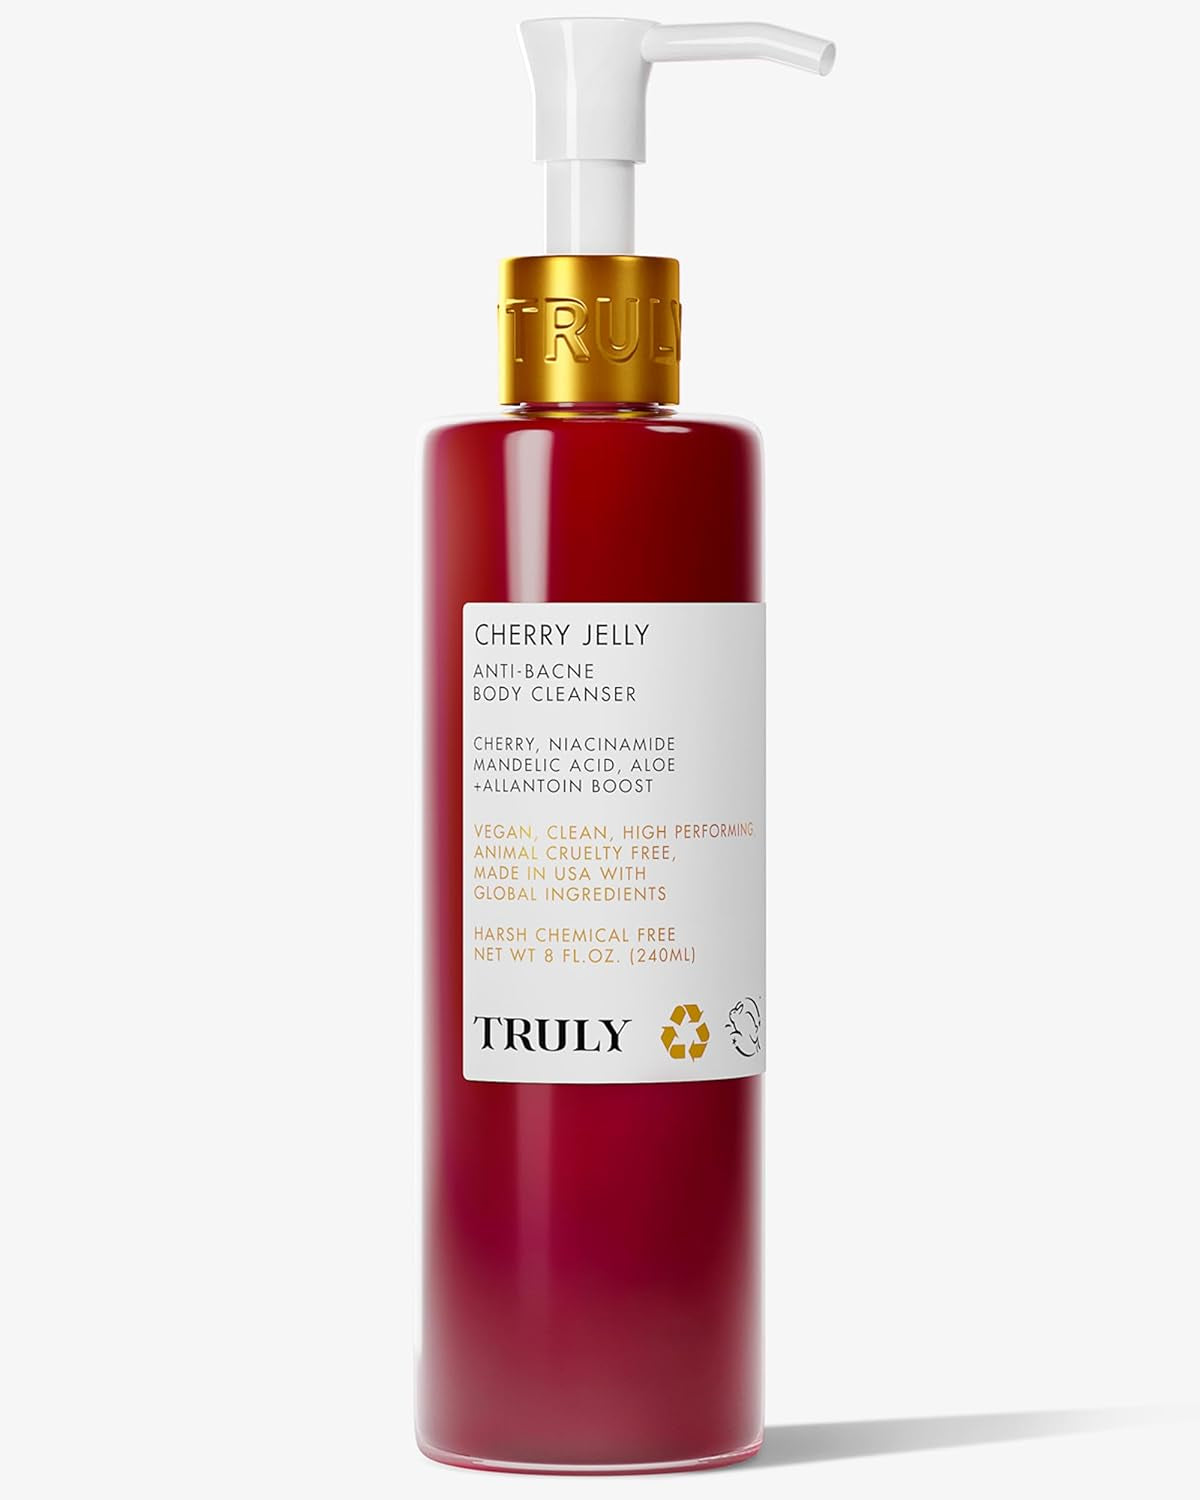 Professional Product Title: "Truly Beauty Cherry Jelly Body Acne Wash - Advanced Formula with Cherry Niacinamide, Allantoin, and Mandelic Acid - Highly Effective Back Acne Treatment, Cleanser, and Dark Spot Remover"